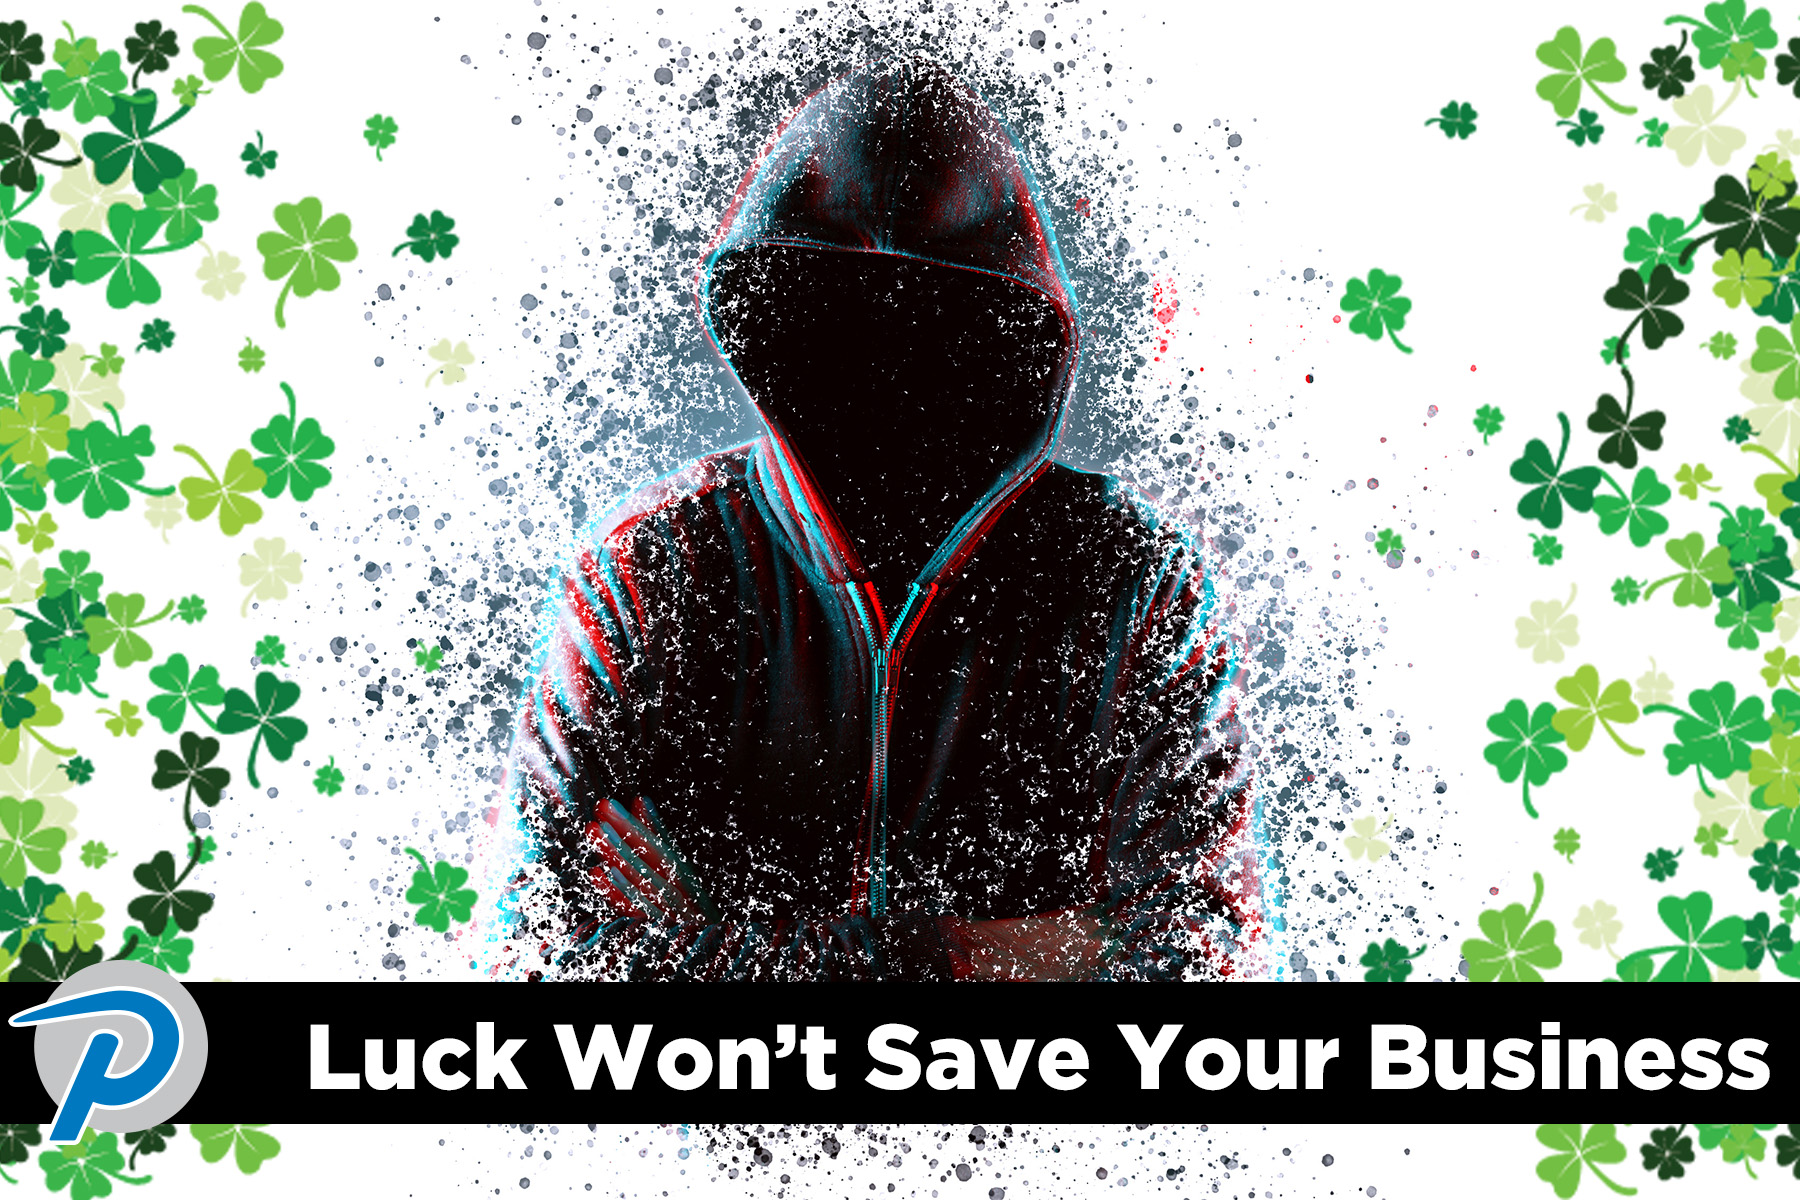 Luck wont save your business from a cyber attack